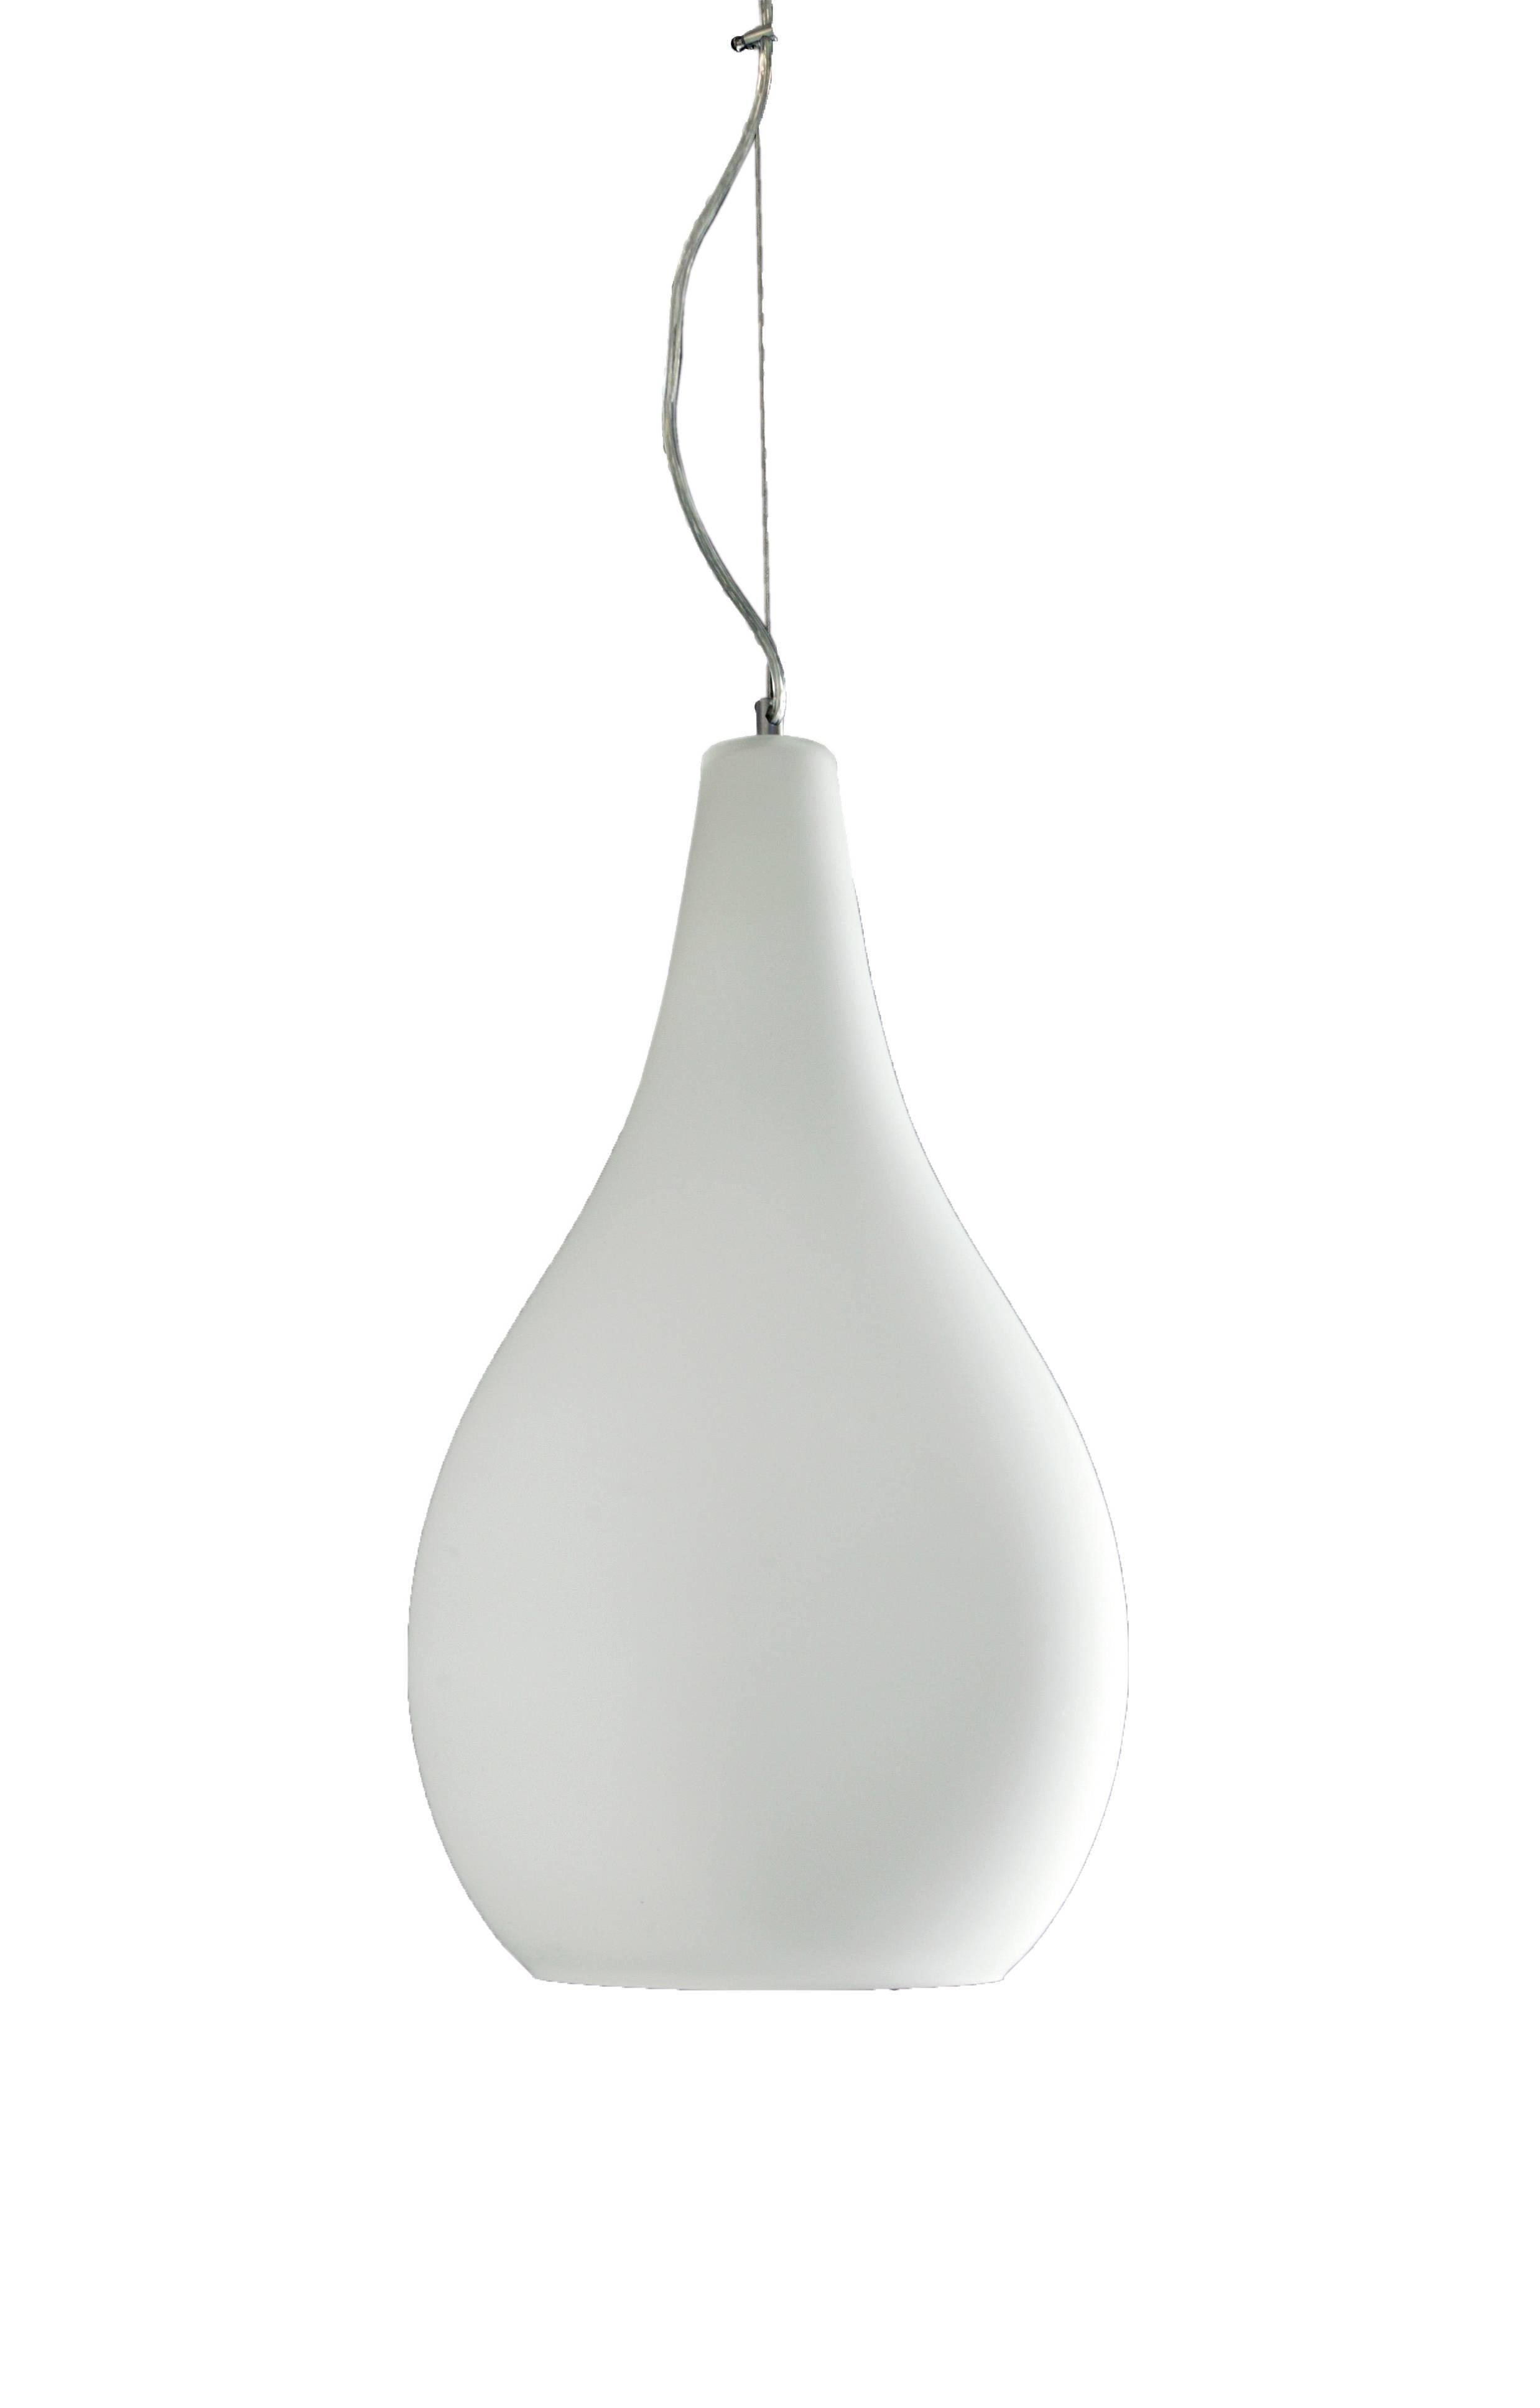 Large glass 'Pisara' pendant lamp by Innolux Oy, Finland. The Pisara is a stylish and high-quality pendant executed in high-quality blown opaline glass with metal suspension wire. A quintessentially Finnish design in the tradition of such luminaries